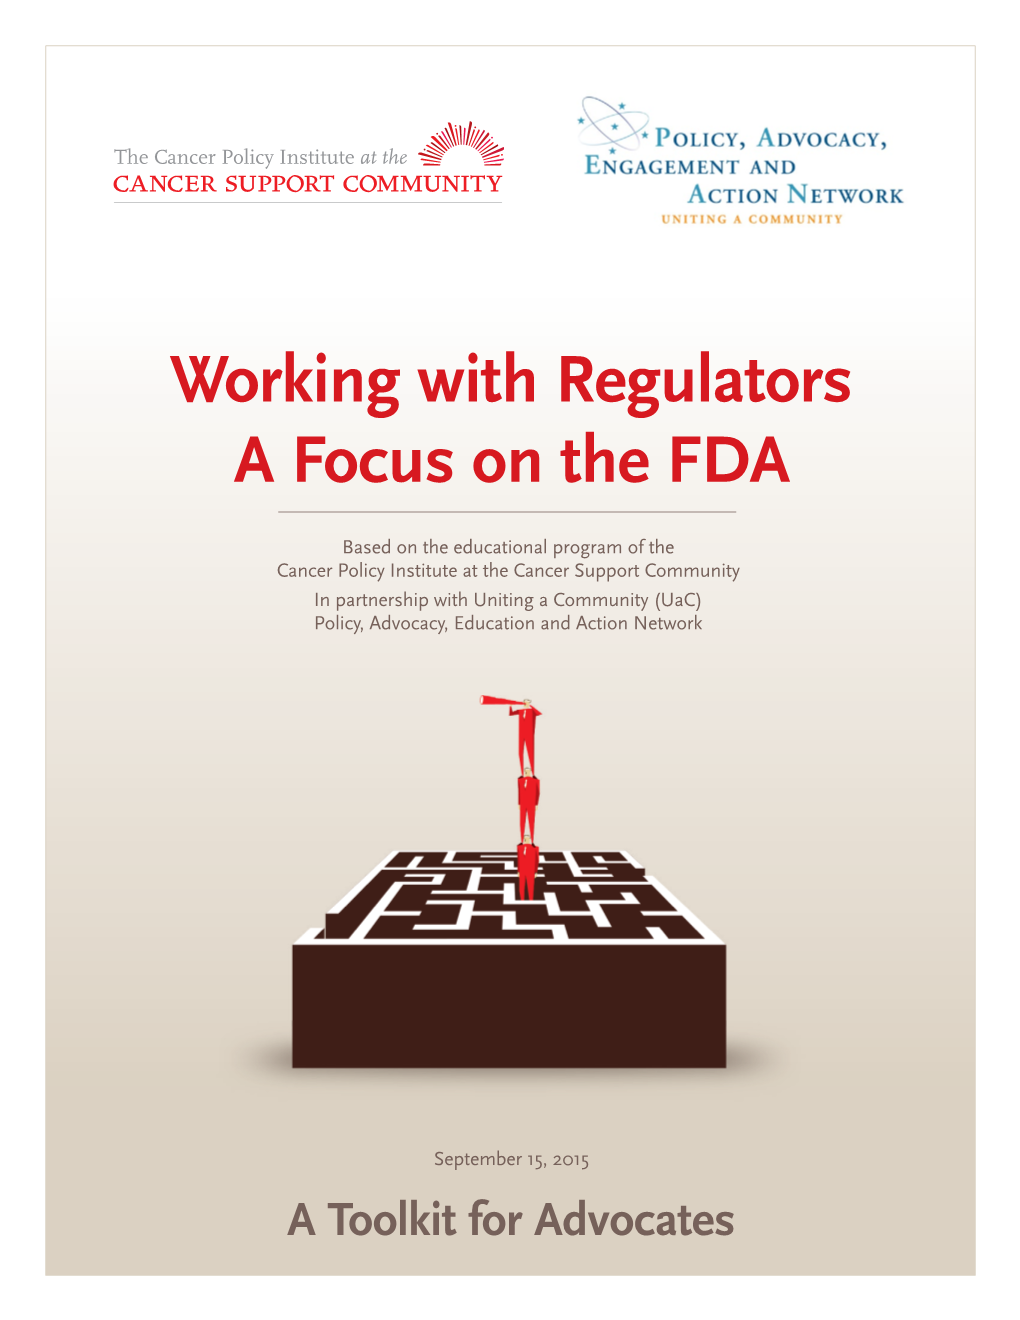 Working with Regulators a Focus on the FDA